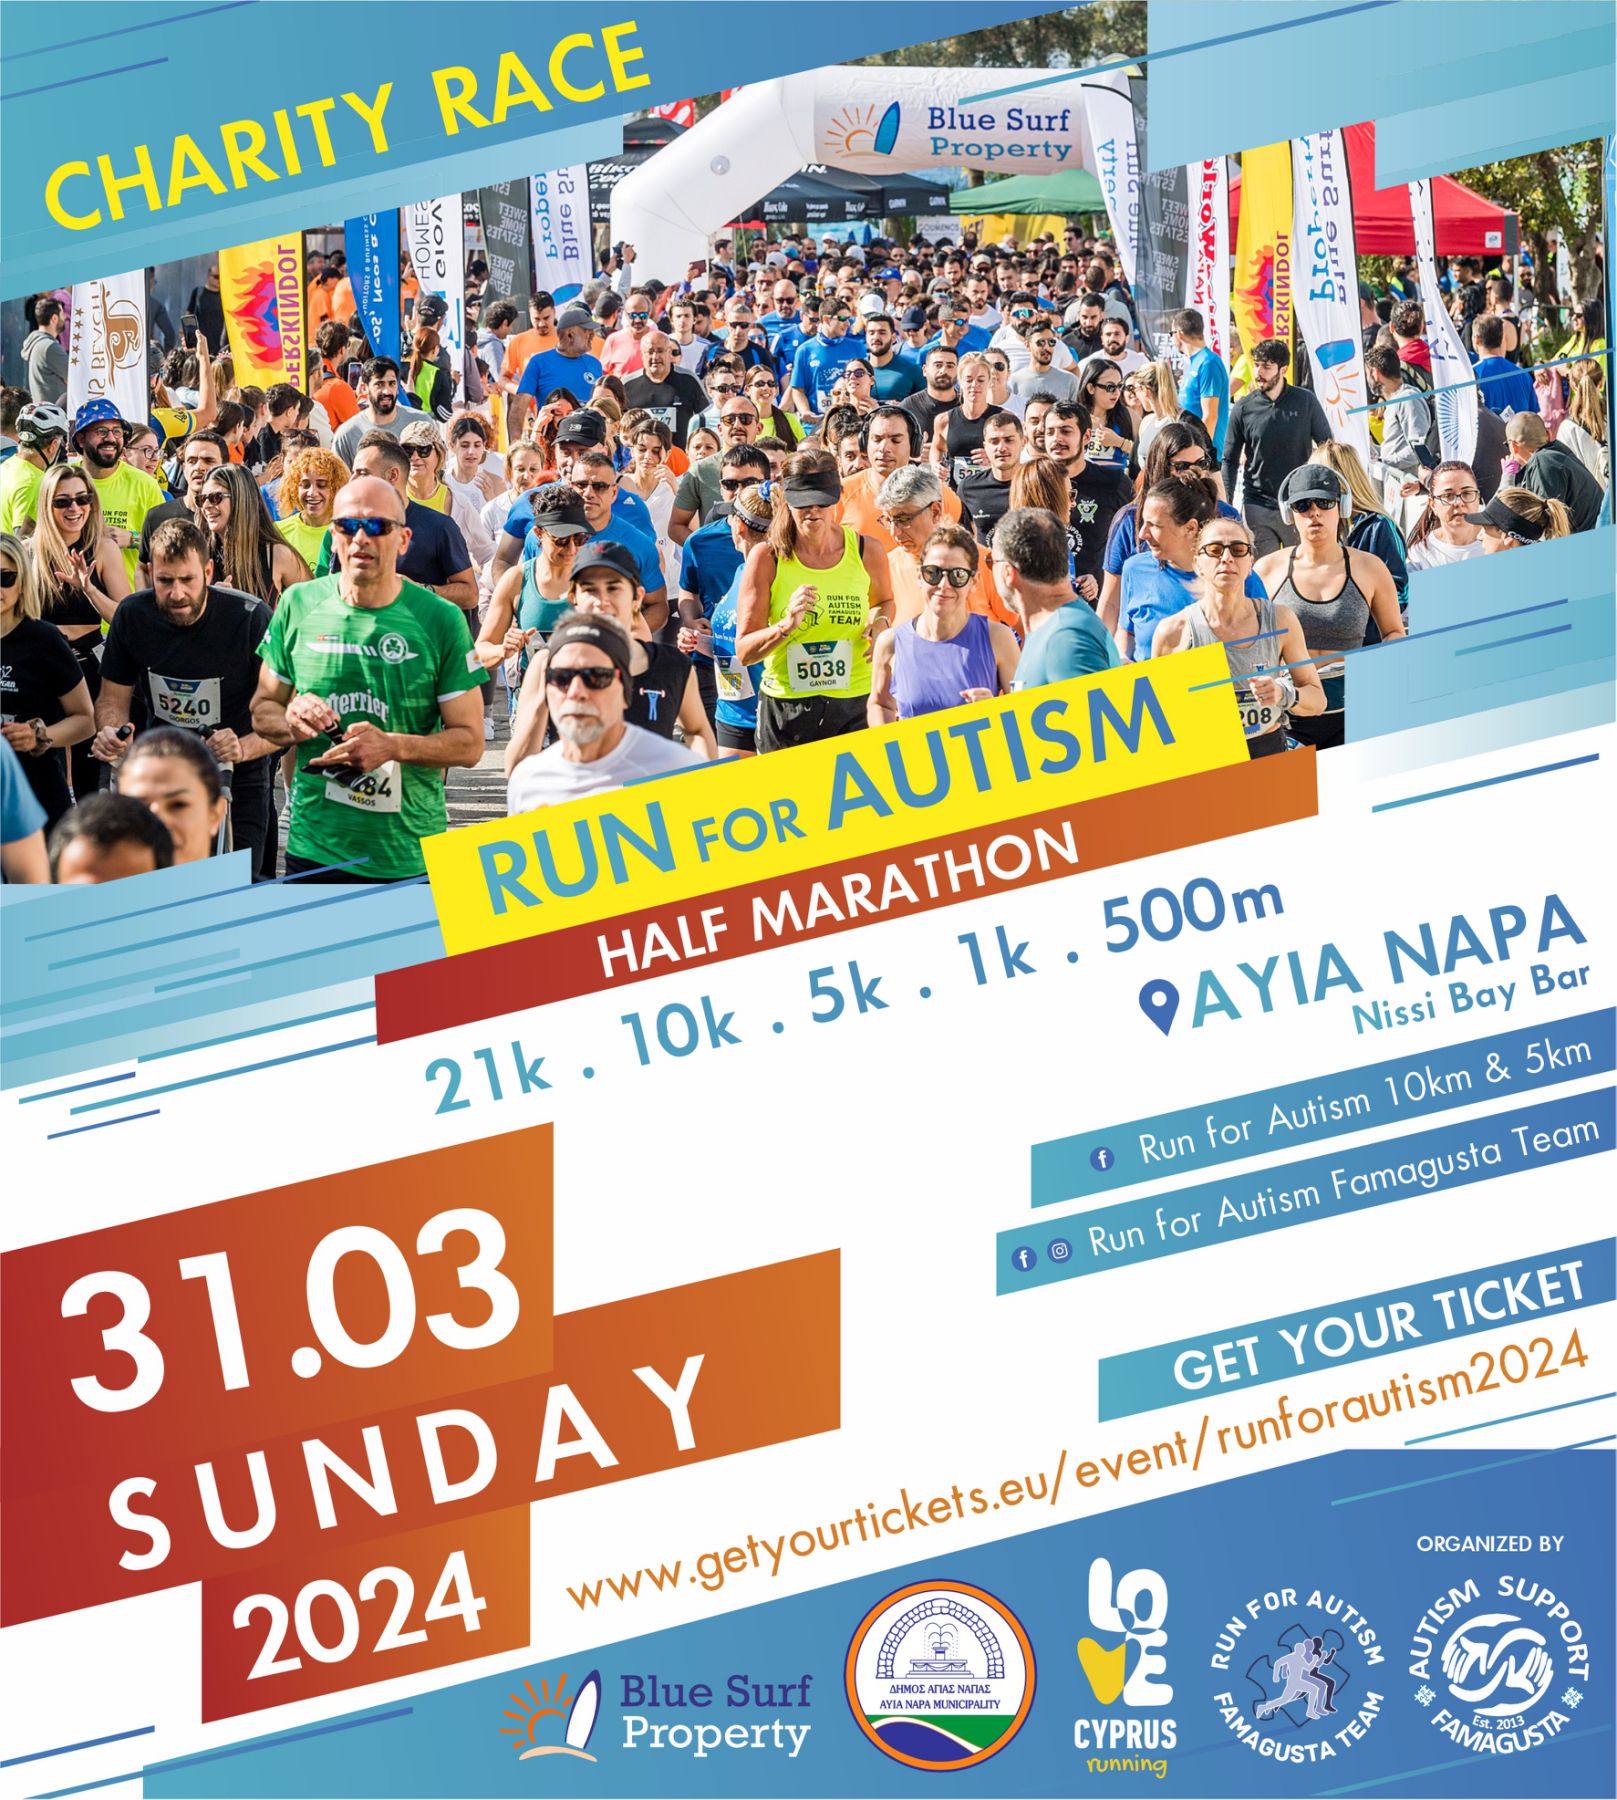 374216788 302853859009308 8707788986059055888 n 3ο Run for Autism, exclusive, ΑΓΙΑ ΝΑΠΑ